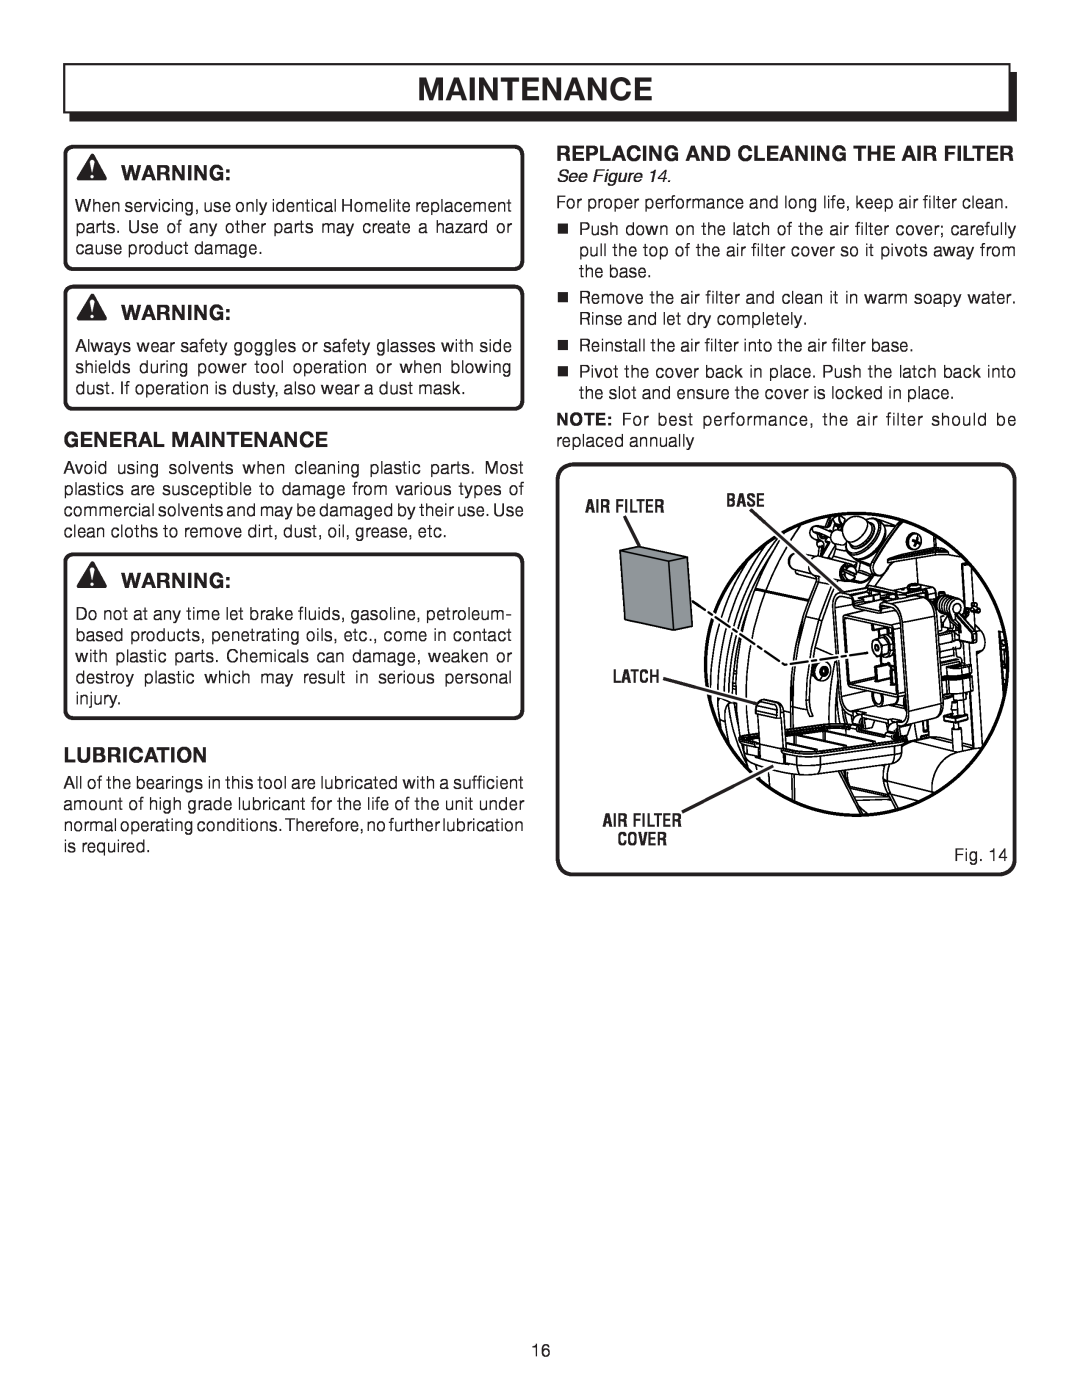 Homelite UT08542A manual Maintenance, See Figure, Latch Air Filter, Cover 